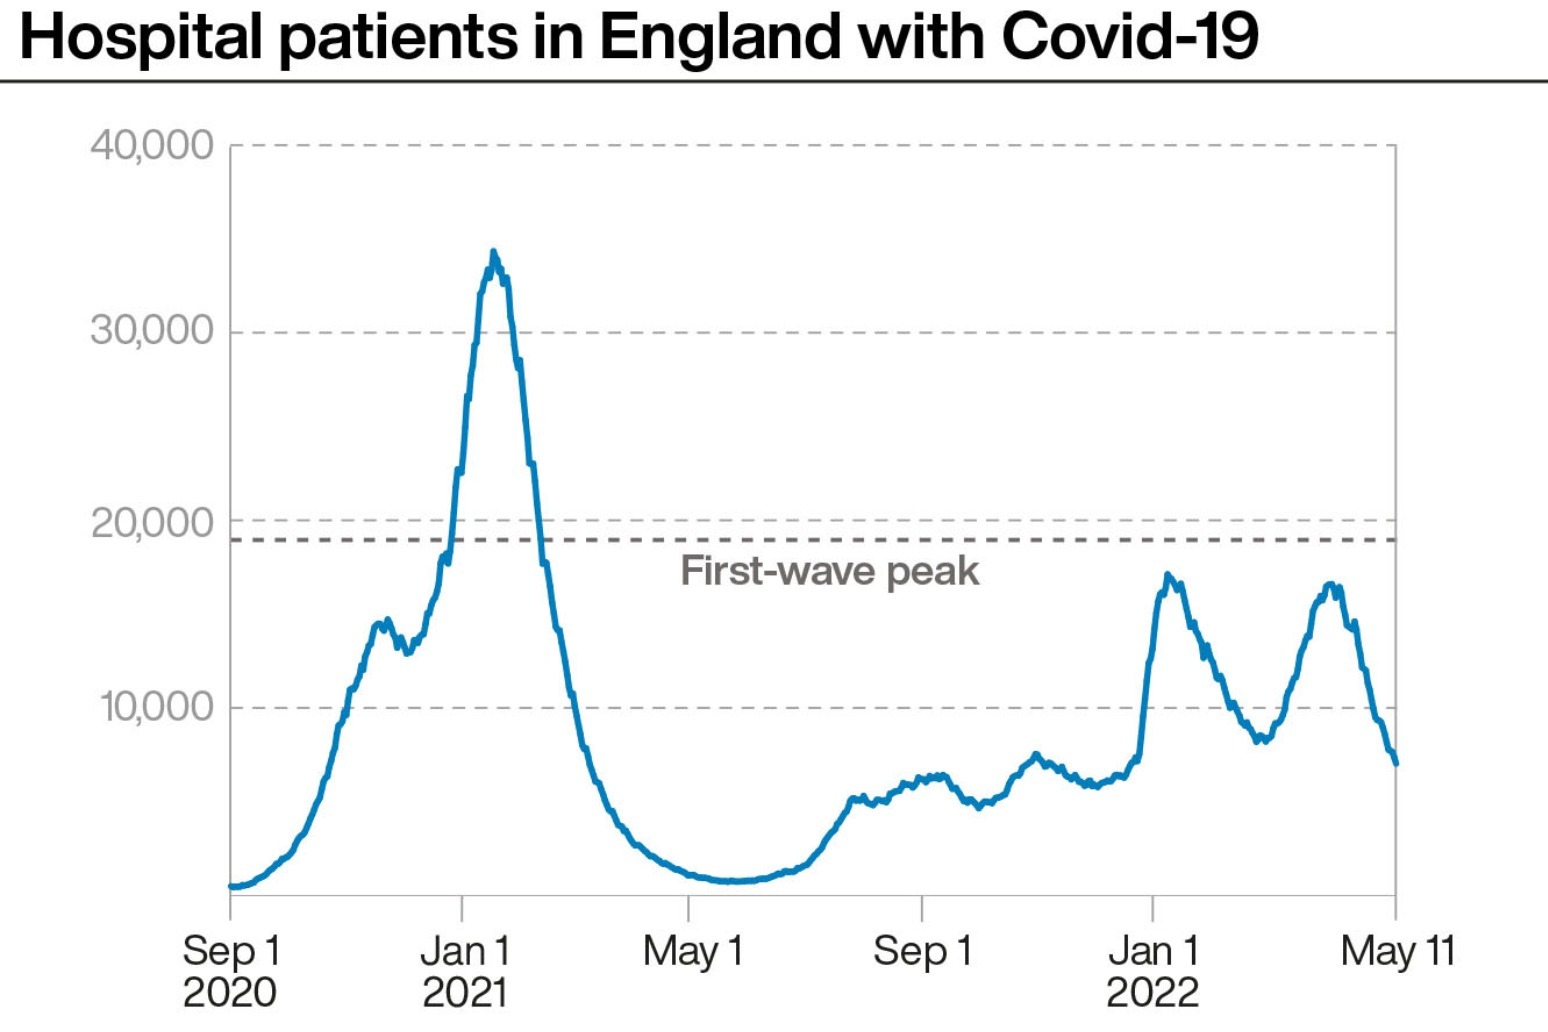 Number of Covid-19 hospital patients in England lowest since Christmas 